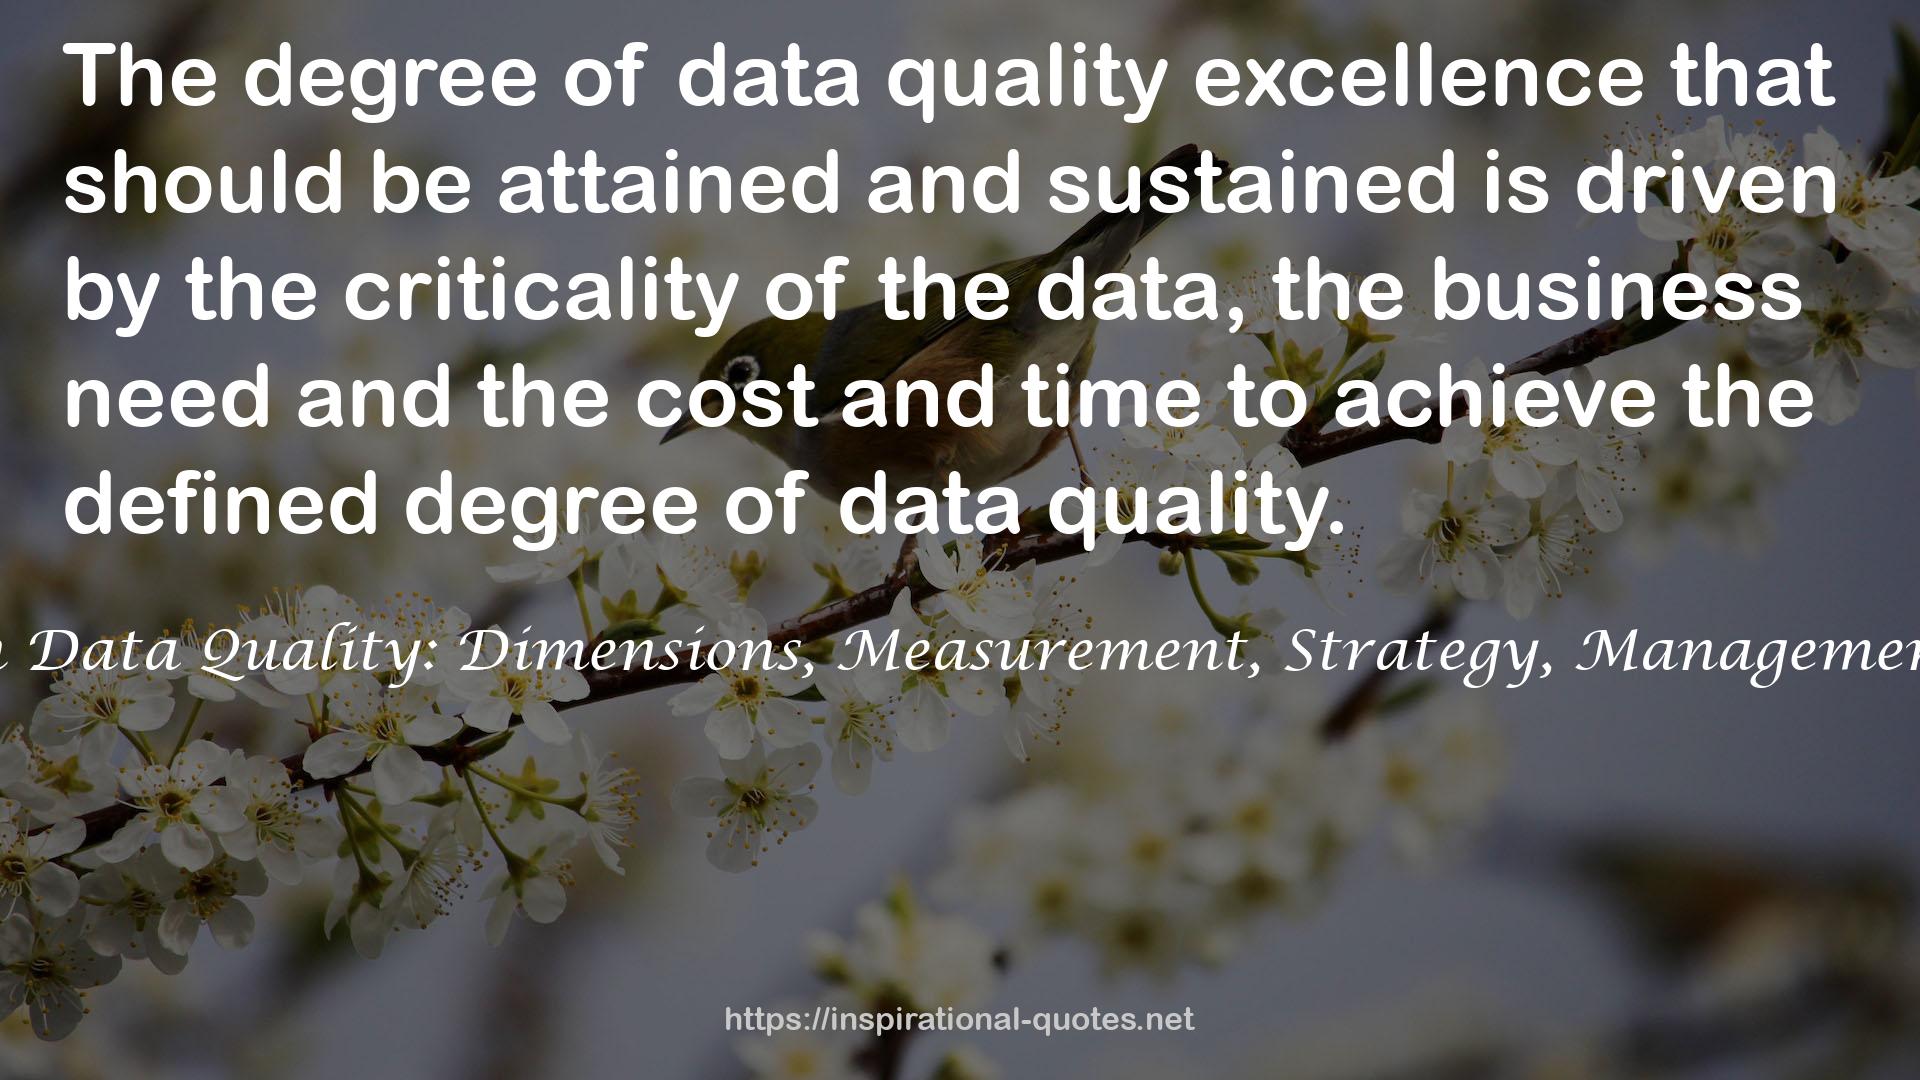 Rupa Mahanti, in Data Quality: Dimensions, Measurement, Strategy, Management, and Governance QUOTES